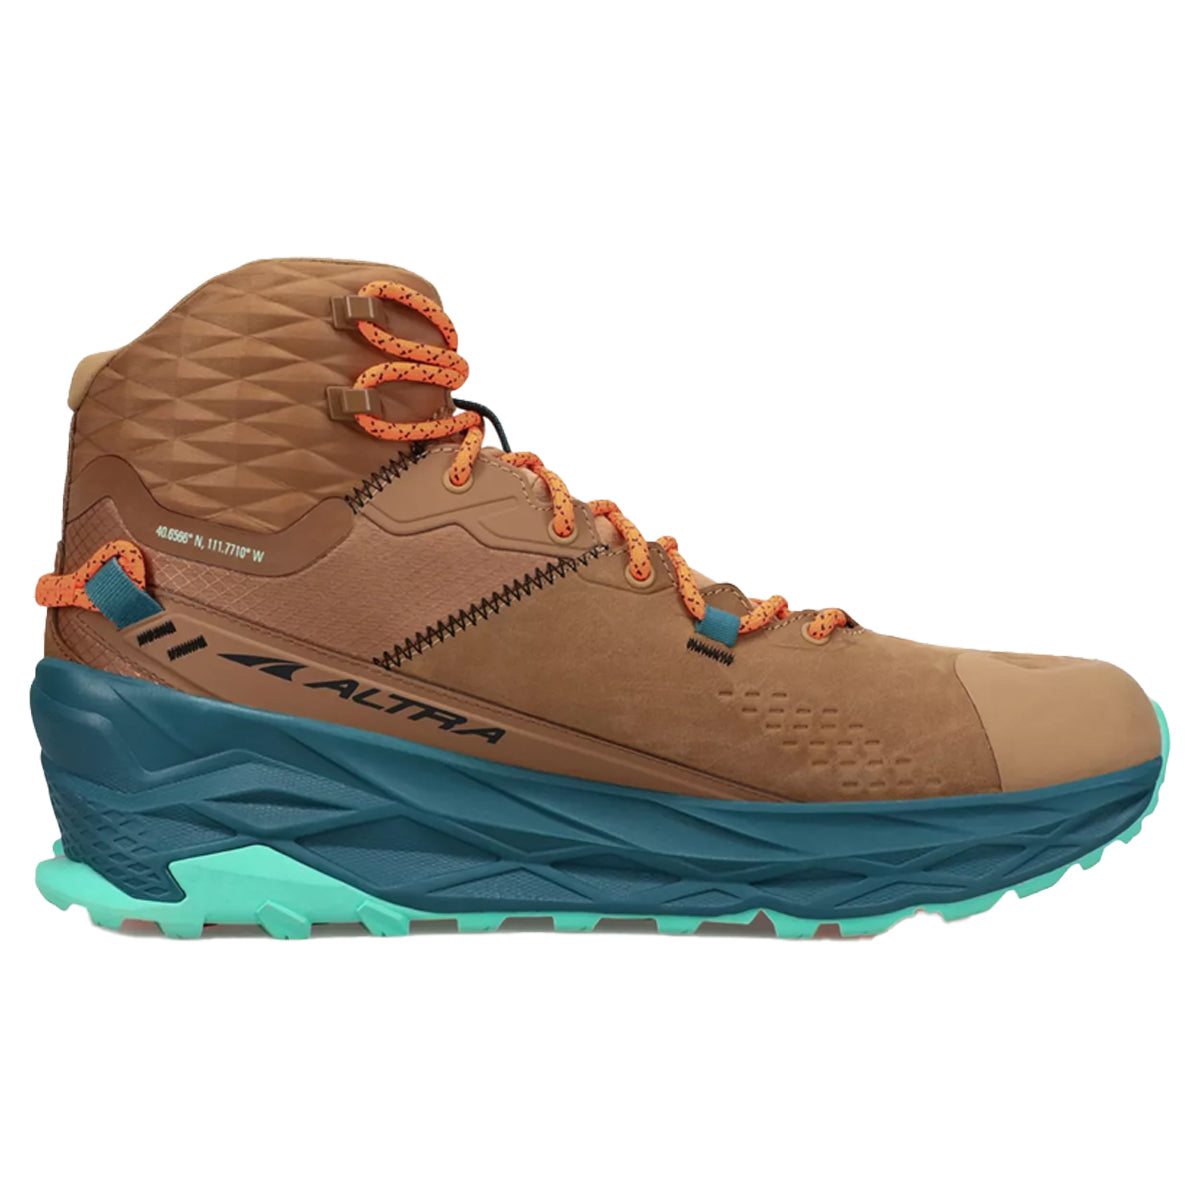 Altra Olympus 5 Hike Mid GTX in Brown by GOHUNT | Altra - GOHUNT Shop